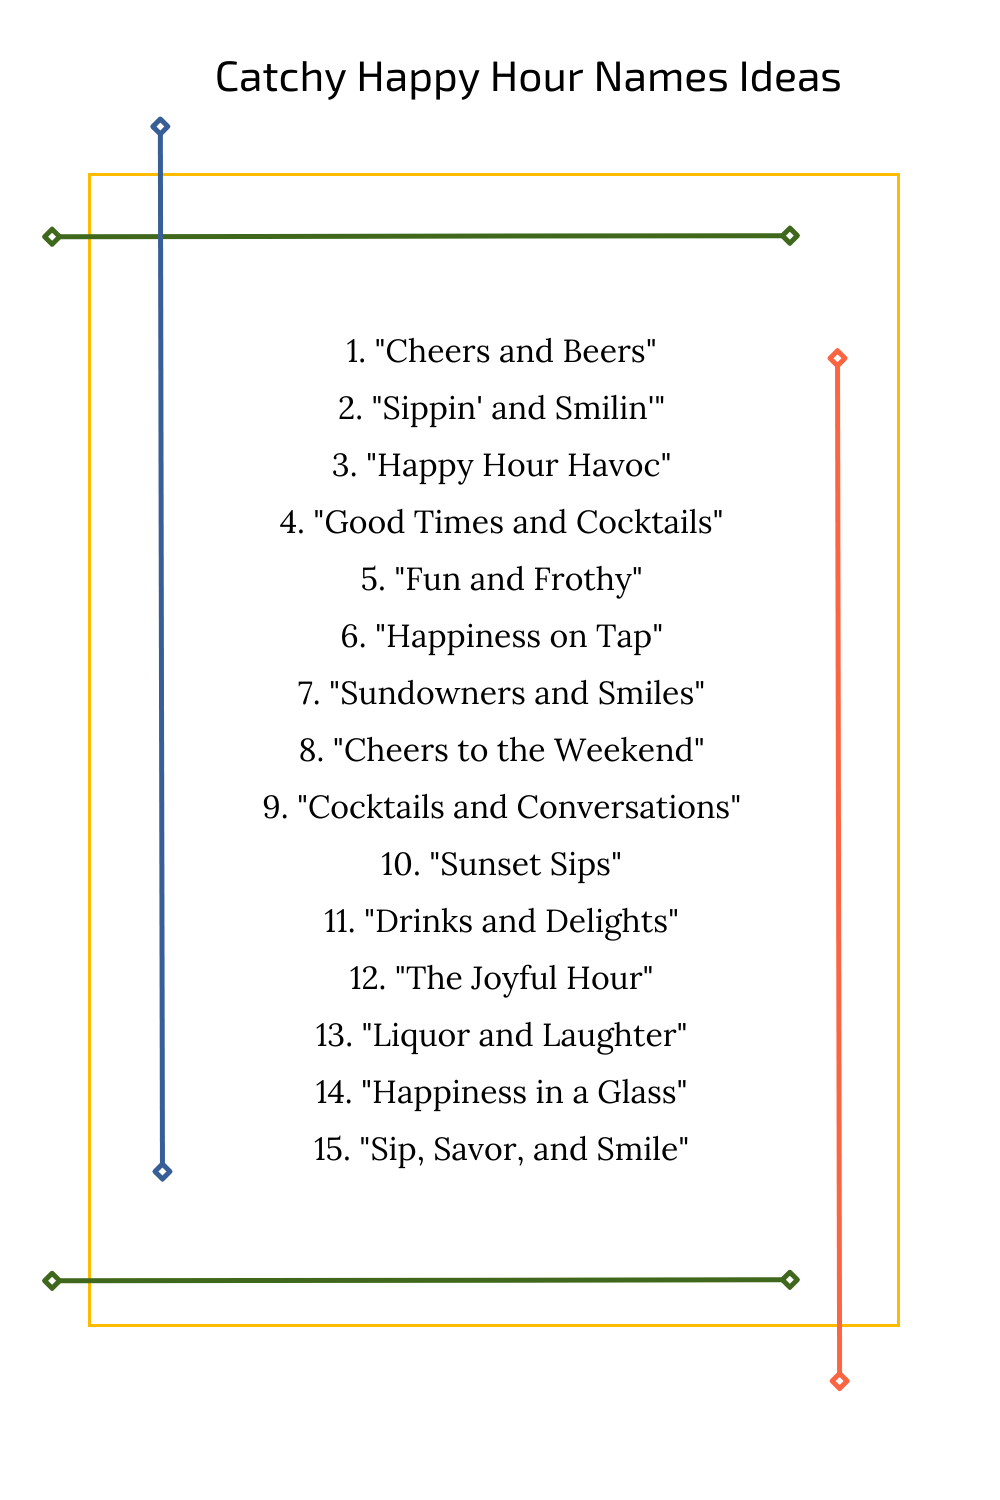 Catchy Happy Hour Names Ideas